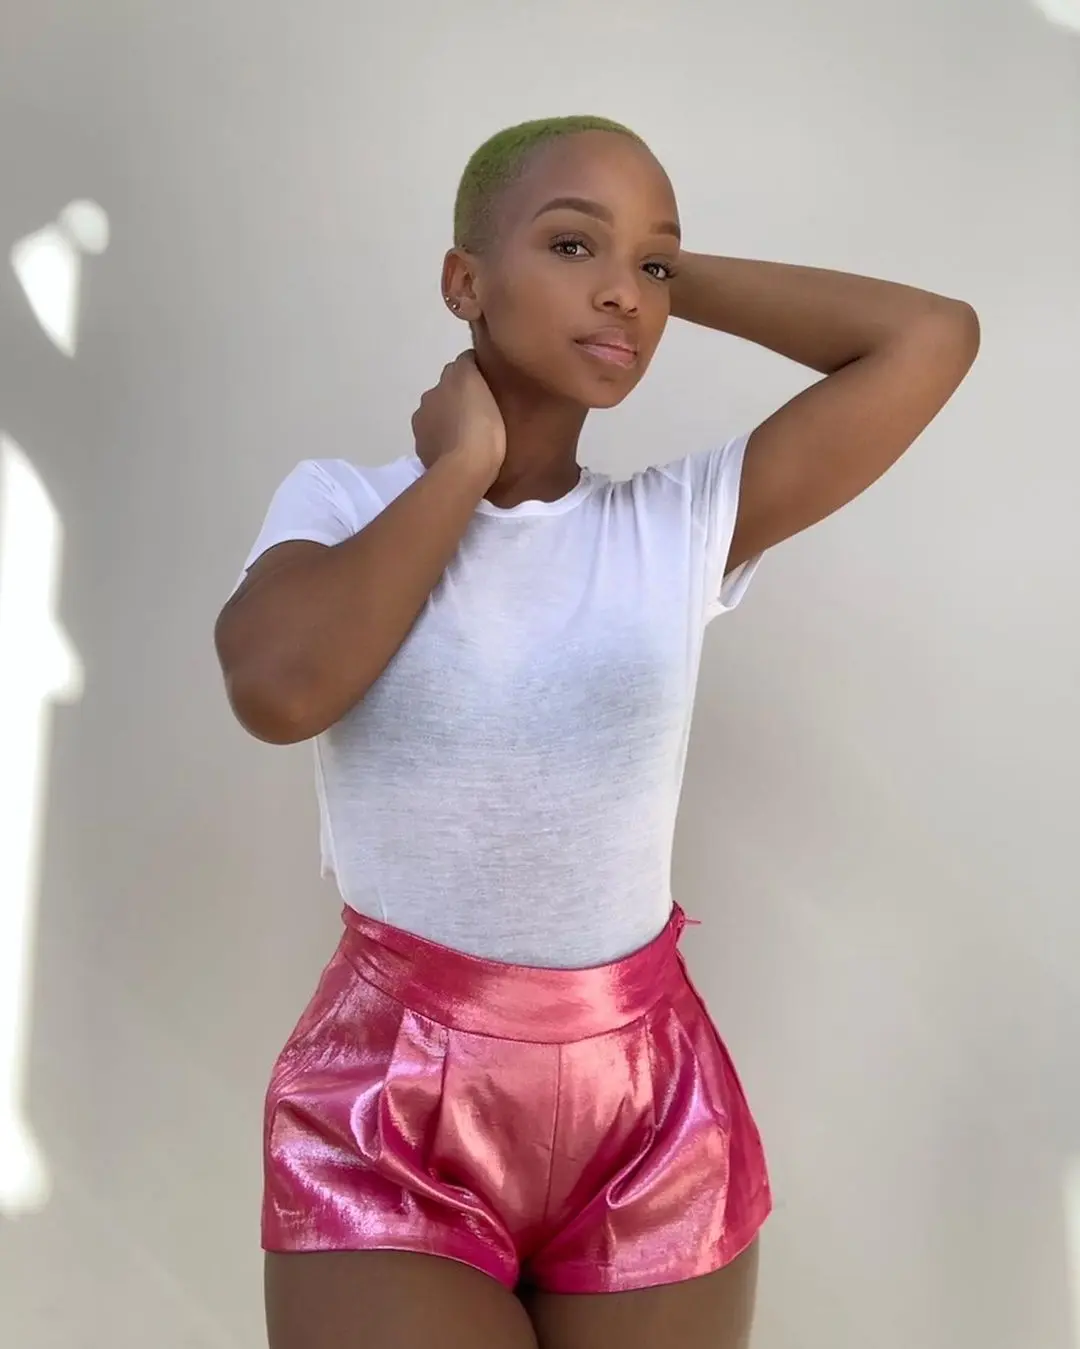 Nandi Madida speaks on her daughter who is autistic